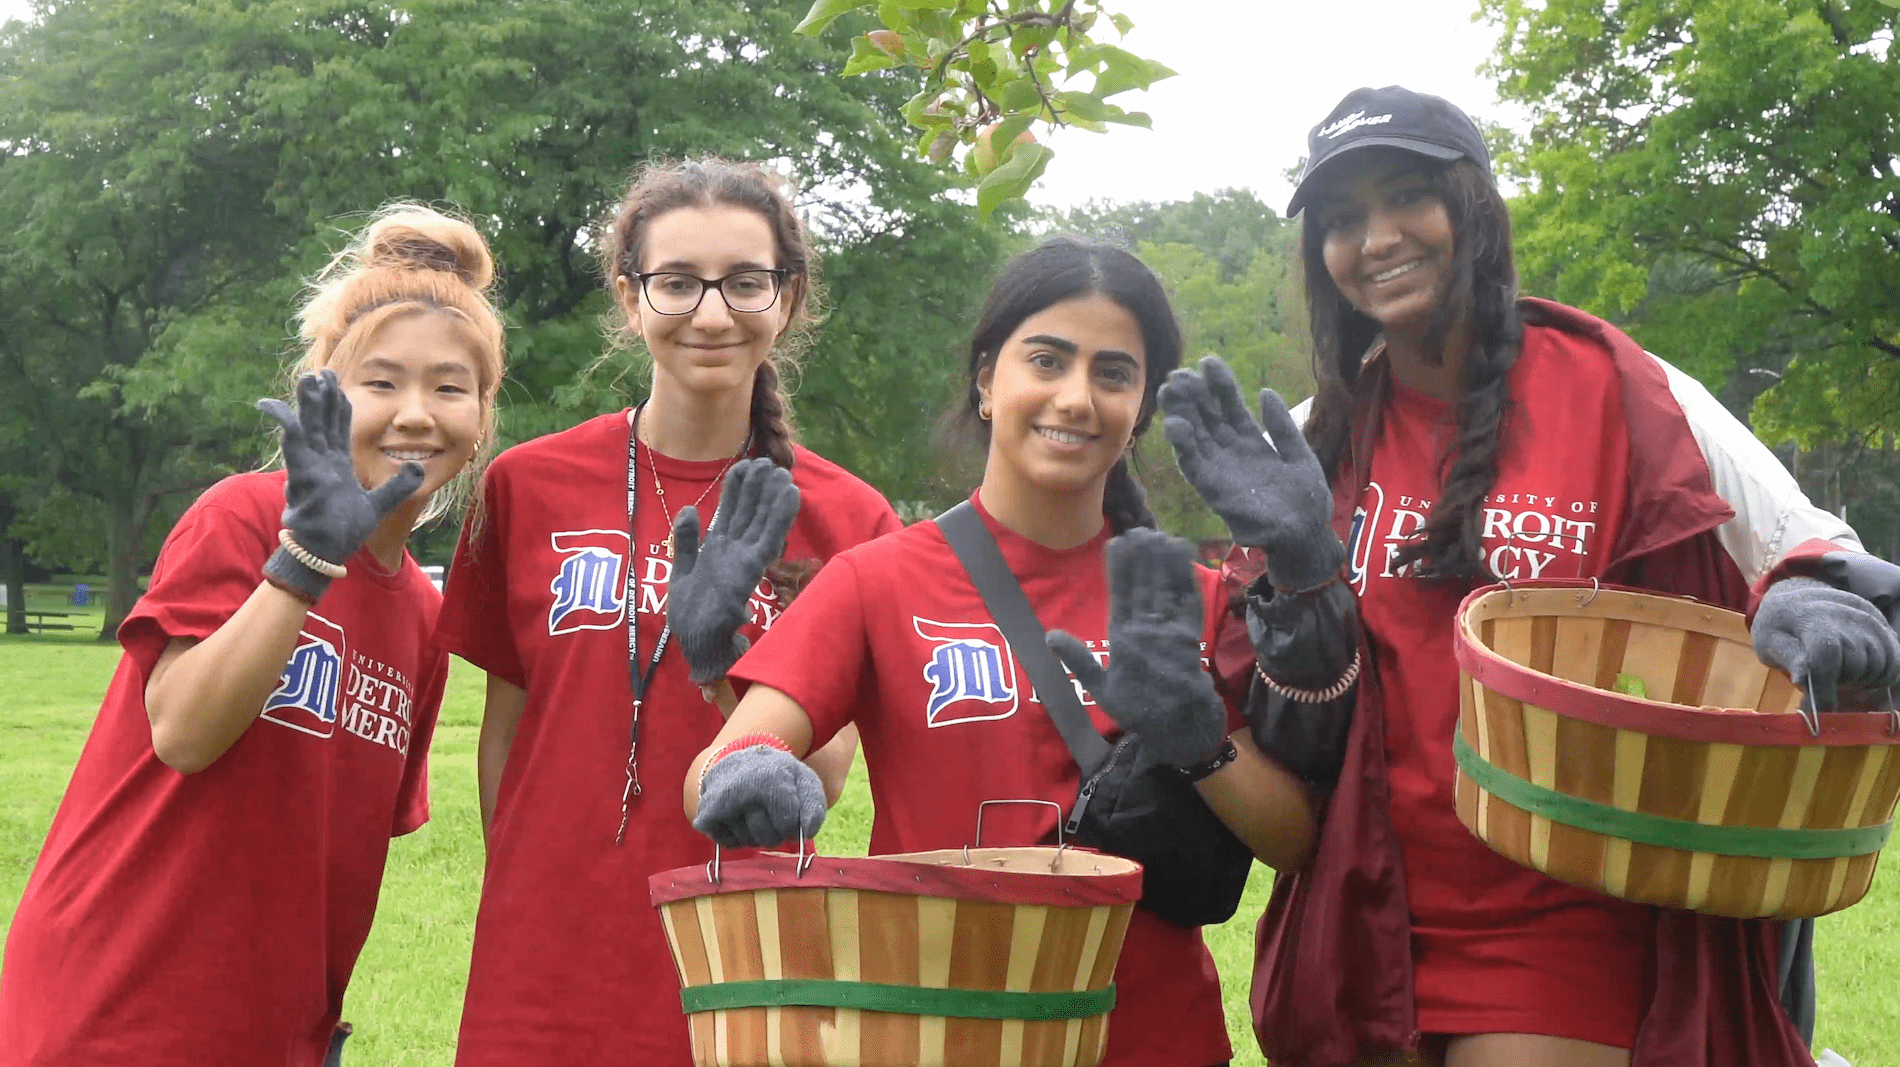 Video of Detroit Mercy students participating in community service projects in neighborhoods and parks near the McNichols Campus.